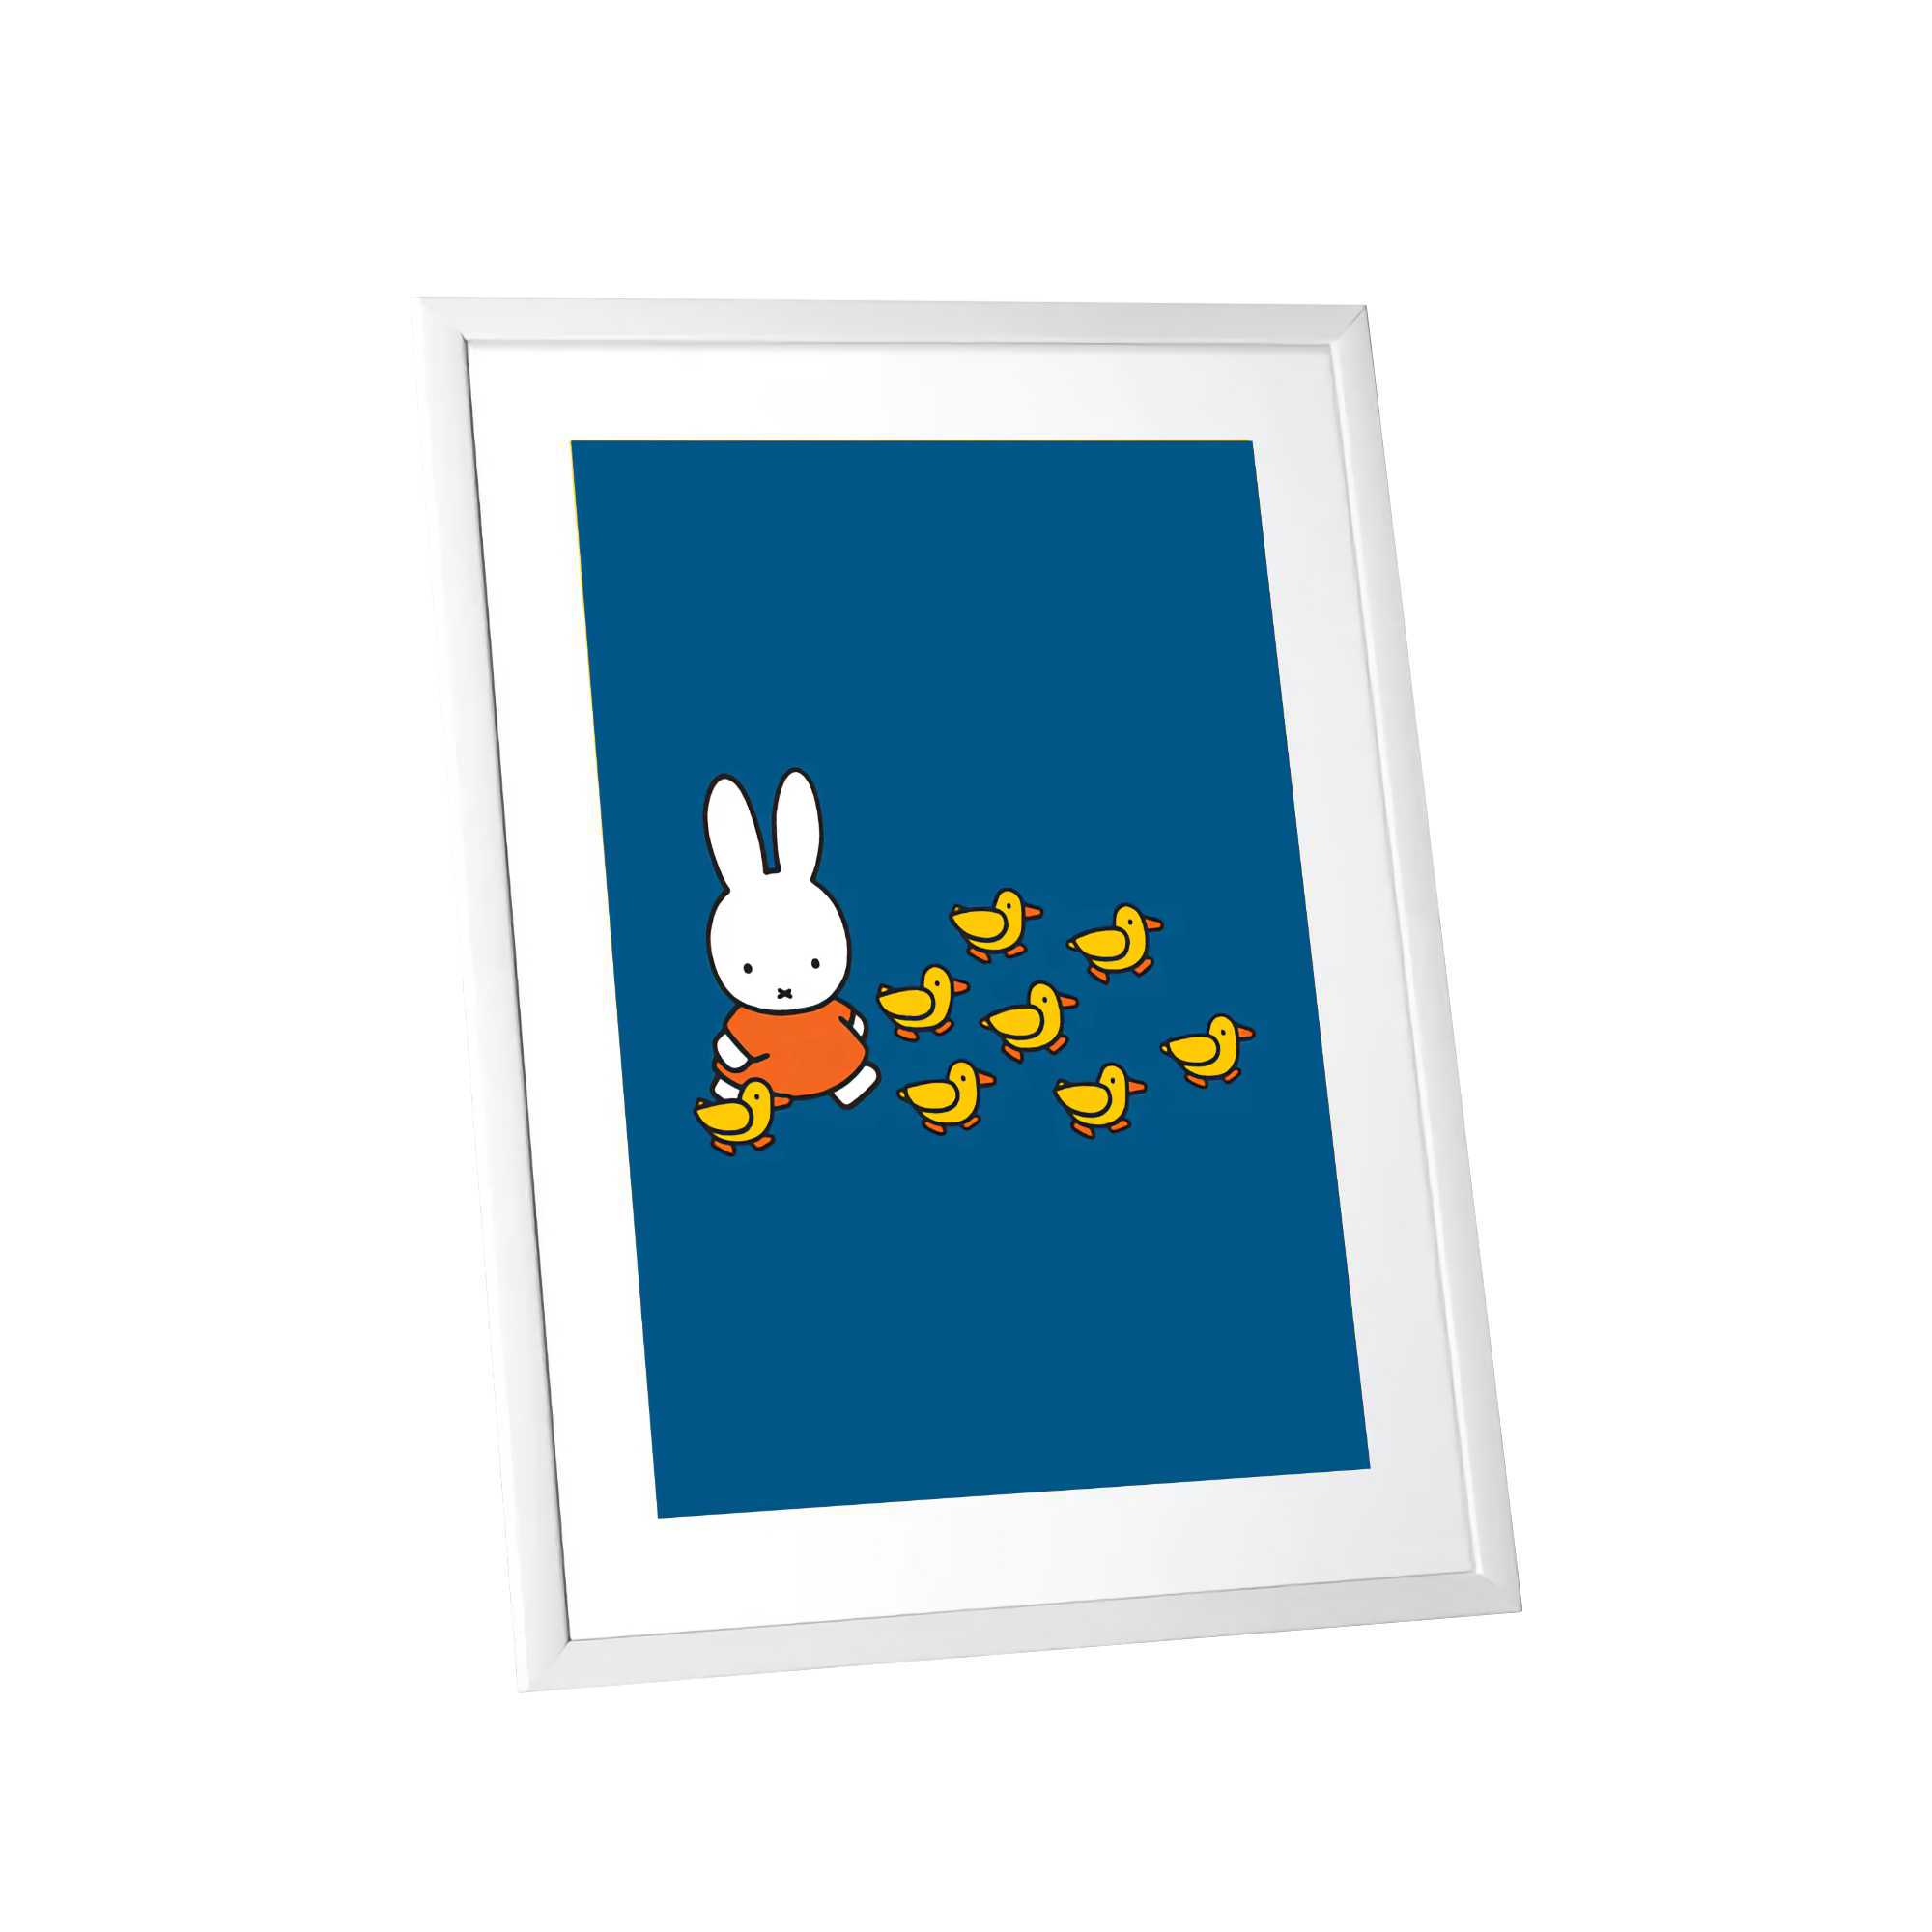 Star Editions Miffy Framed Print, Ducklings (11x14")